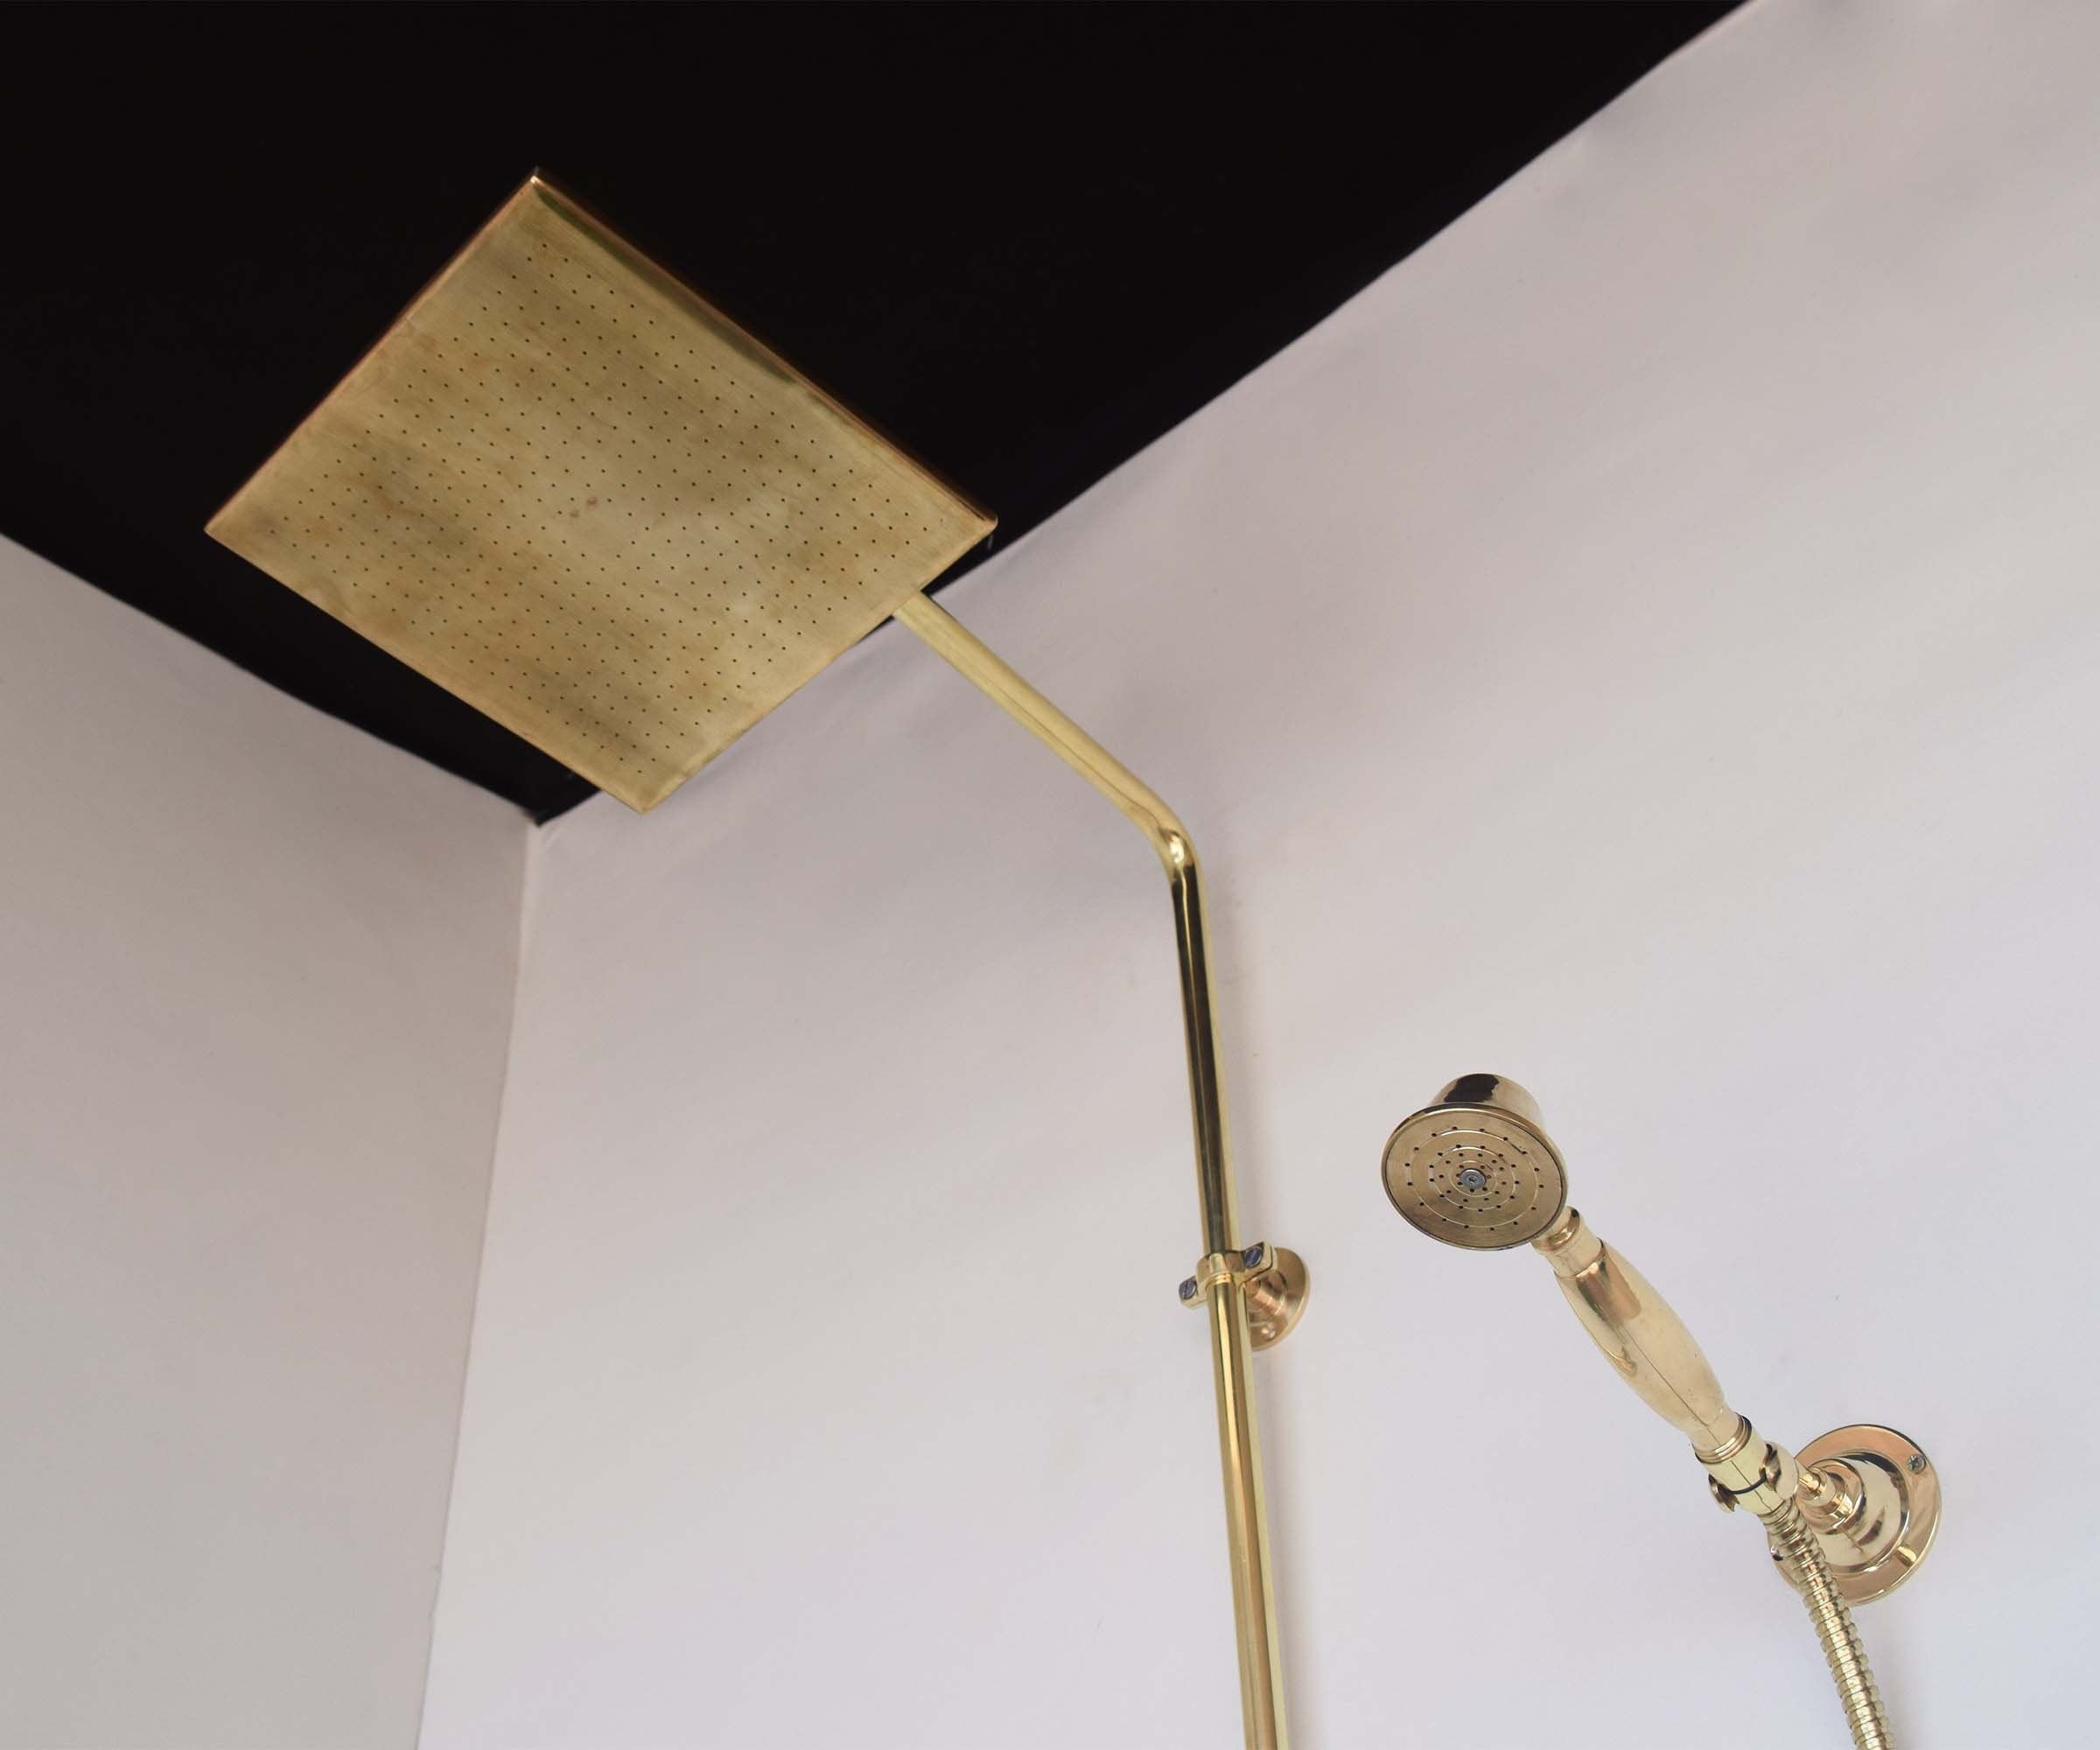 Unlacquered Brass Exposed shower system with tub spout and Handheld Shower and Rain Shower Head - Zayian